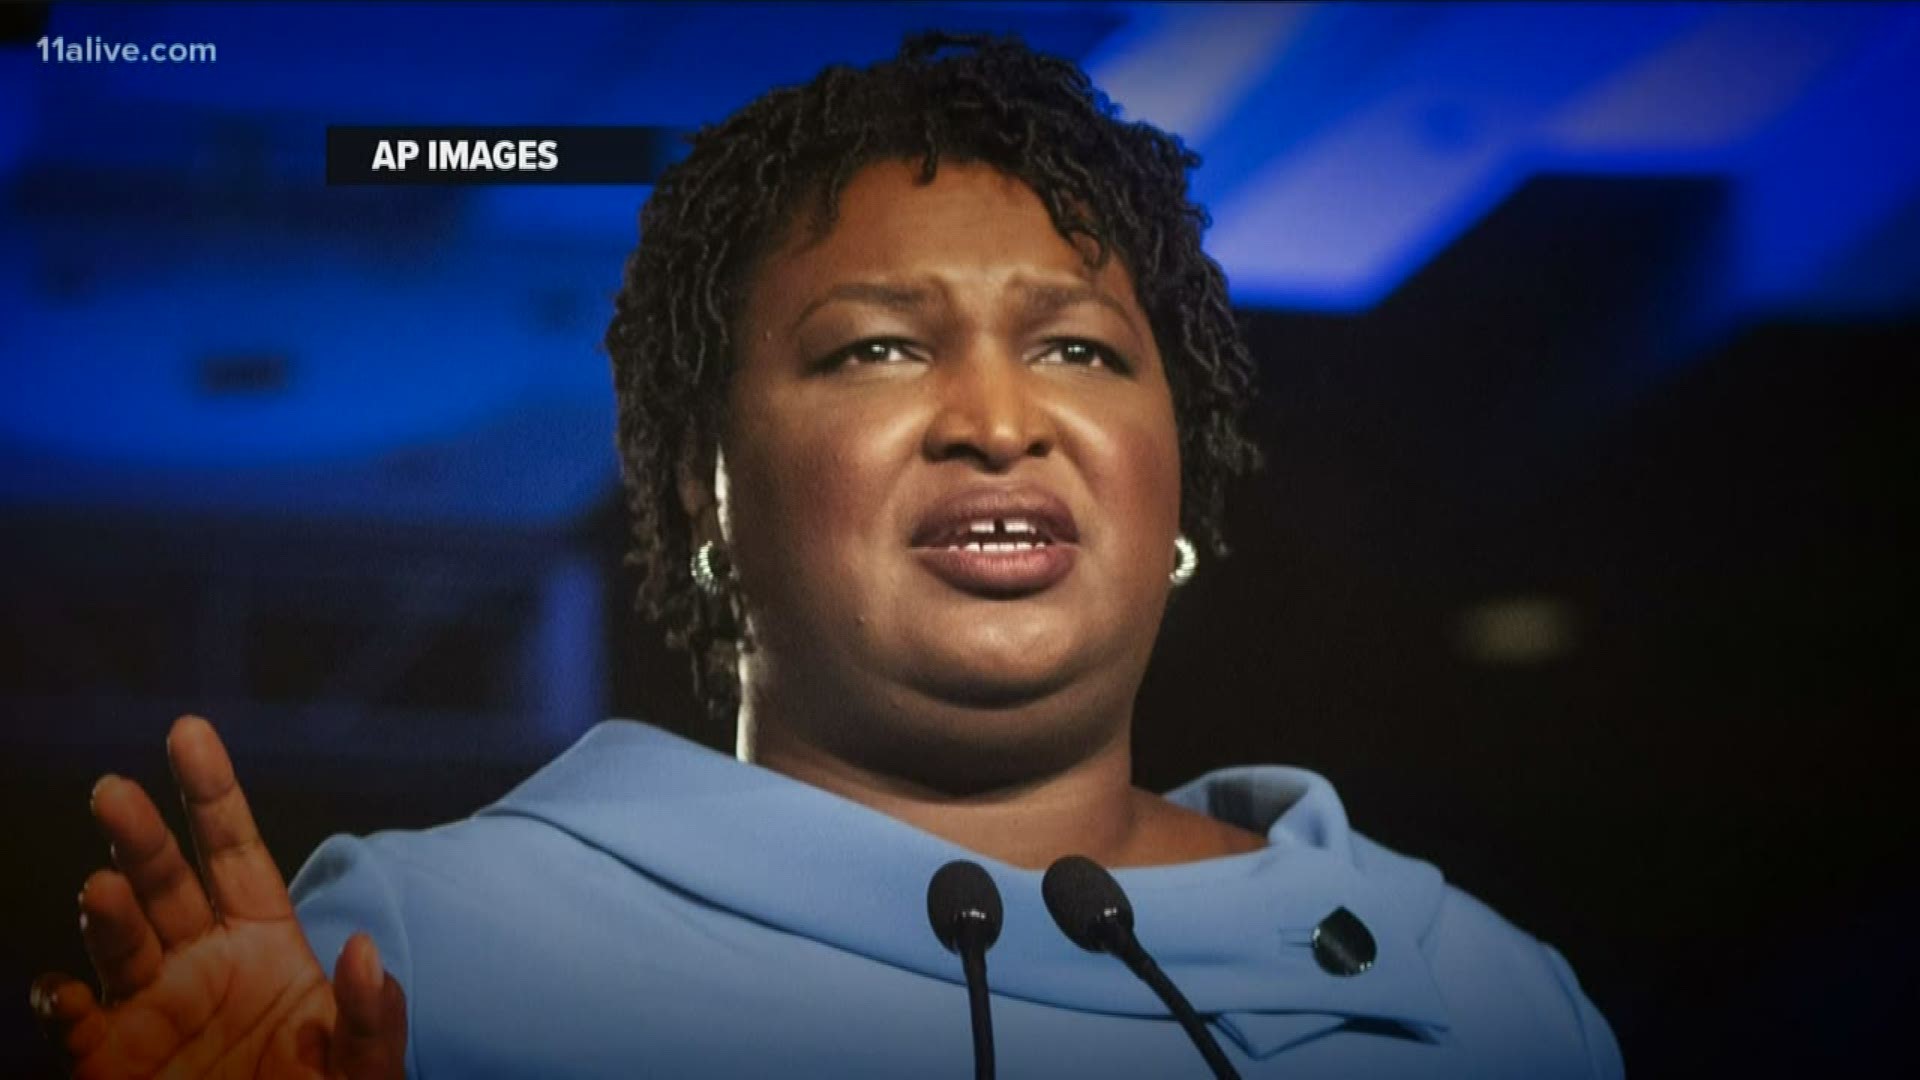 On MSNBC on Thursday, Abrams also offered support for former Vice President Joe Biden, who has acknowledged that his tendency toward physical displays of affection made some women uncomfortable and has promised to be "more mindful" of respecting personal space.